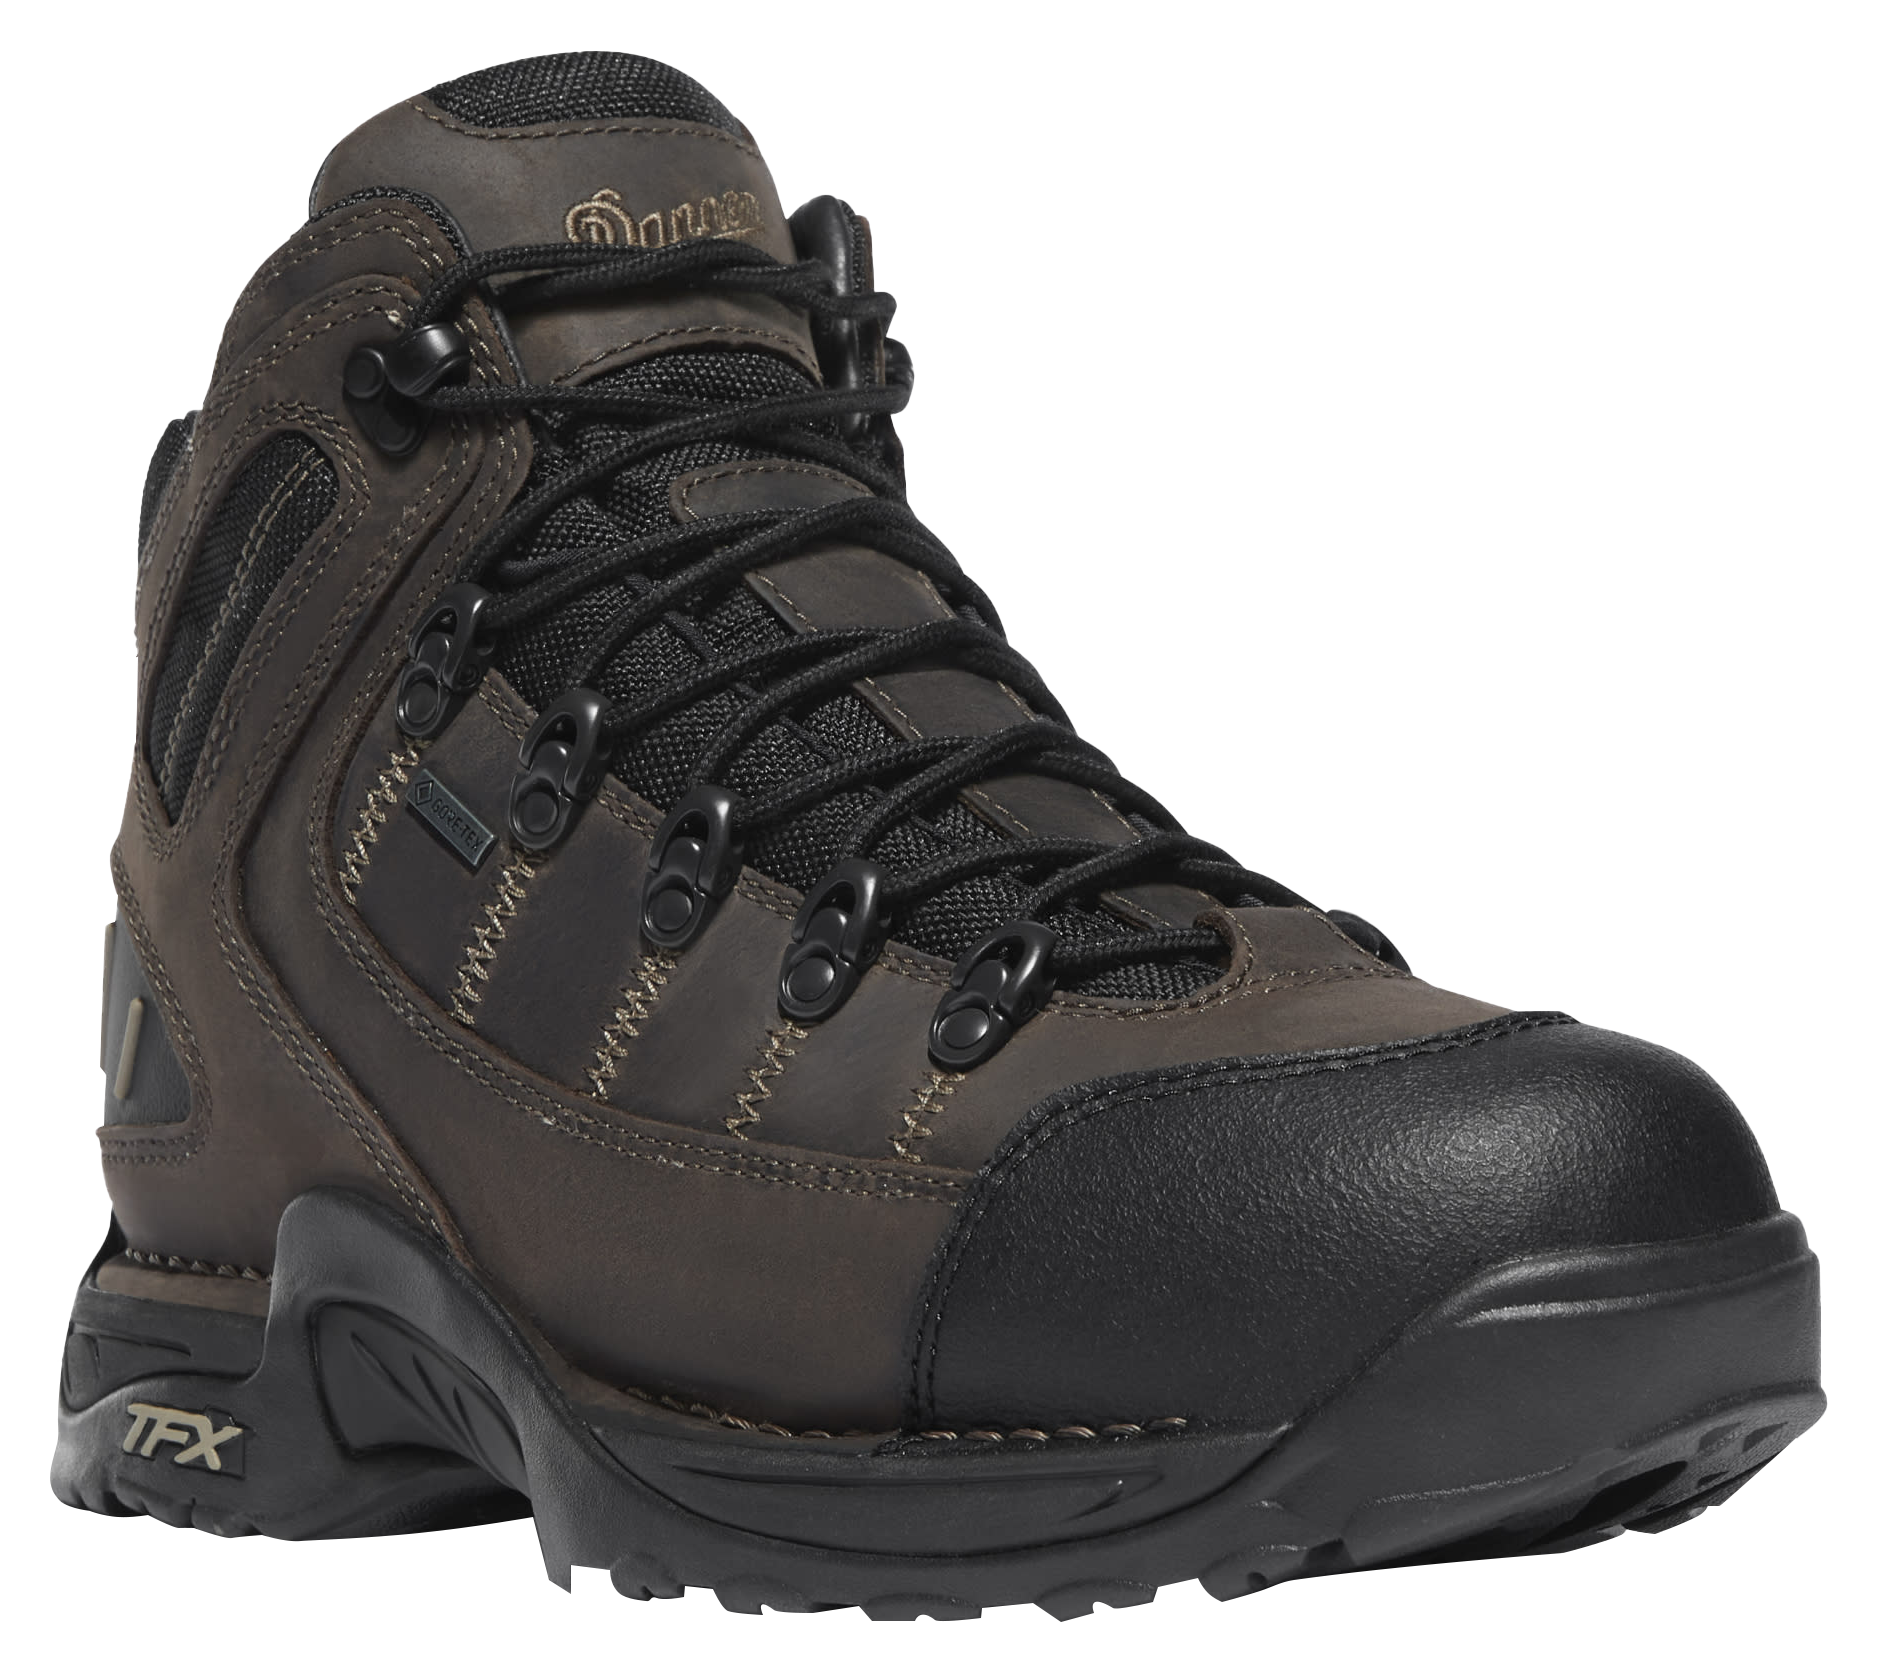 Danner 453 GORE-TEX Waterproof Hiking Boots for Men - Loam Brown/Chocolate Chip - 9W